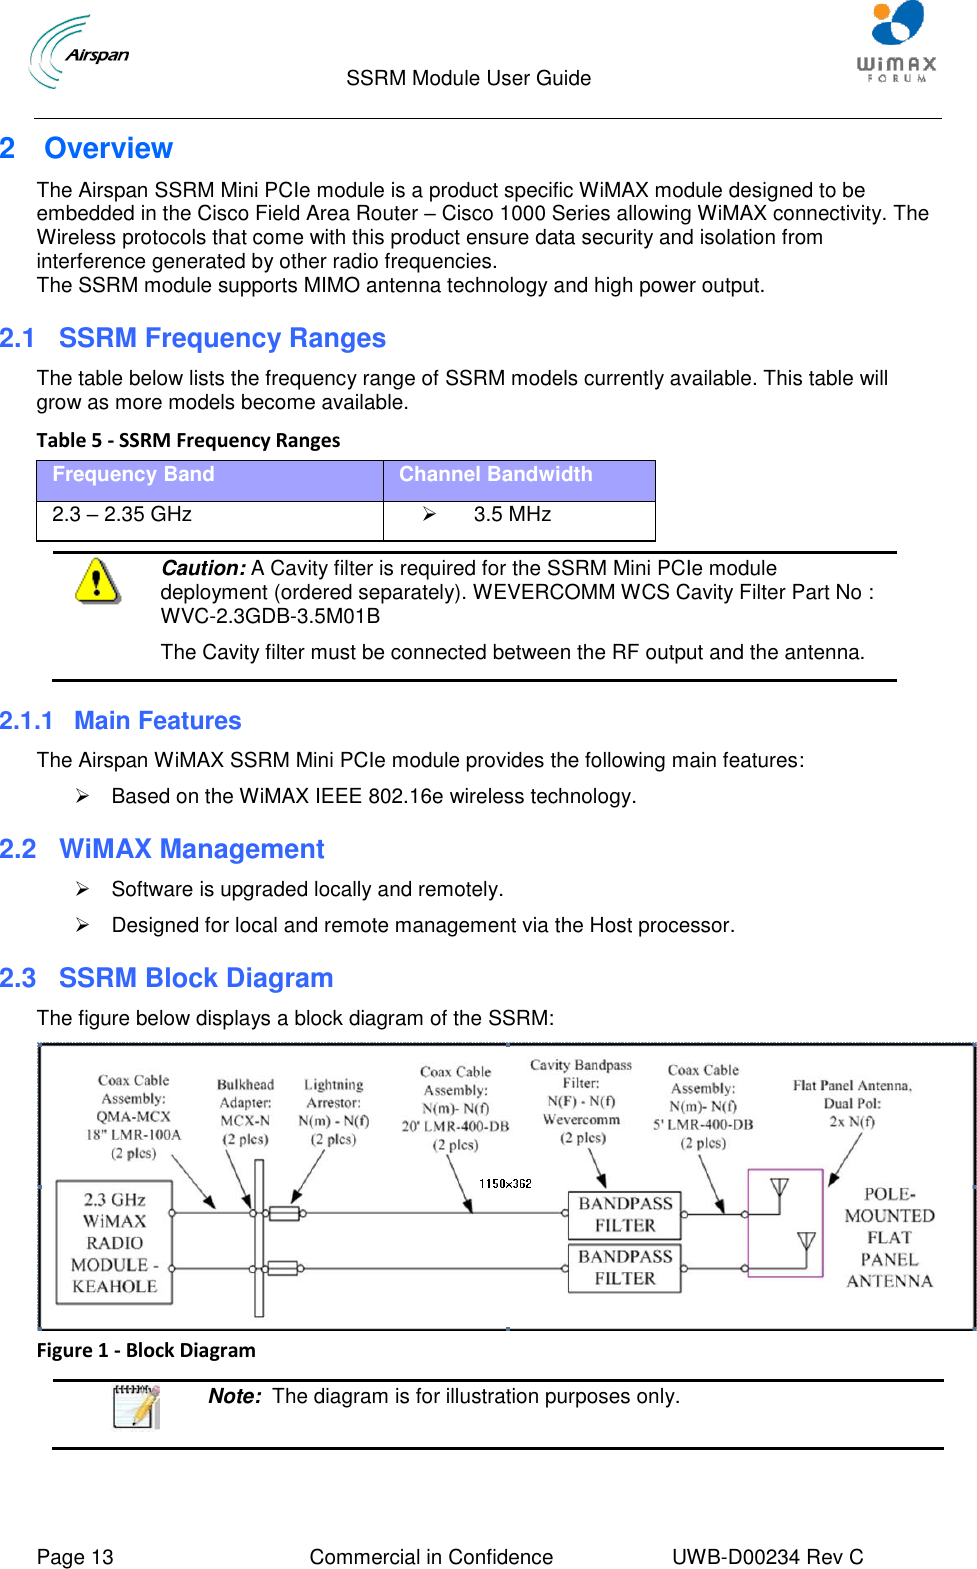                                  SSRM Module User Guide     Page 13  Commercial in Confidence  UWB-D00234 Rev C    2  Overview The Airspan SSRM Mini PCIe module is a product specific WiMAX module designed to be embedded in the Cisco Field Area Router – Cisco 1000 Series allowing WiMAX connectivity. The Wireless protocols that come with this product ensure data security and isolation from interference generated by other radio frequencies. The SSRM module supports MIMO antenna technology and high power output.  2.1 SSRM Frequency Ranges The table below lists the frequency range of SSRM models currently available. This table will grow as more models become available. Table 5 - SSRM Frequency Ranges Frequency Band Channel Bandwidth 2.3 – 2.35 GHz   3.5 MHz   Caution: A Cavity filter is required for the SSRM Mini PCIe module deployment (ordered separately). WEVERCOMM WCS Cavity Filter Part No : WVC-2.3GDB-3.5M01B The Cavity filter must be connected between the RF output and the antenna. 2.1.1  Main Features The Airspan WiMAX SSRM Mini PCIe module provides the following main features:   Based on the WiMAX IEEE 802.16e wireless technology. 2.2  WiMAX Management   Software is upgraded locally and remotely.   Designed for local and remote management via the Host processor. 2.3 SSRM Block Diagram The figure below displays a block diagram of the SSRM:  Figure 1 - Block Diagram   Note:  The diagram is for illustration purposes only.  